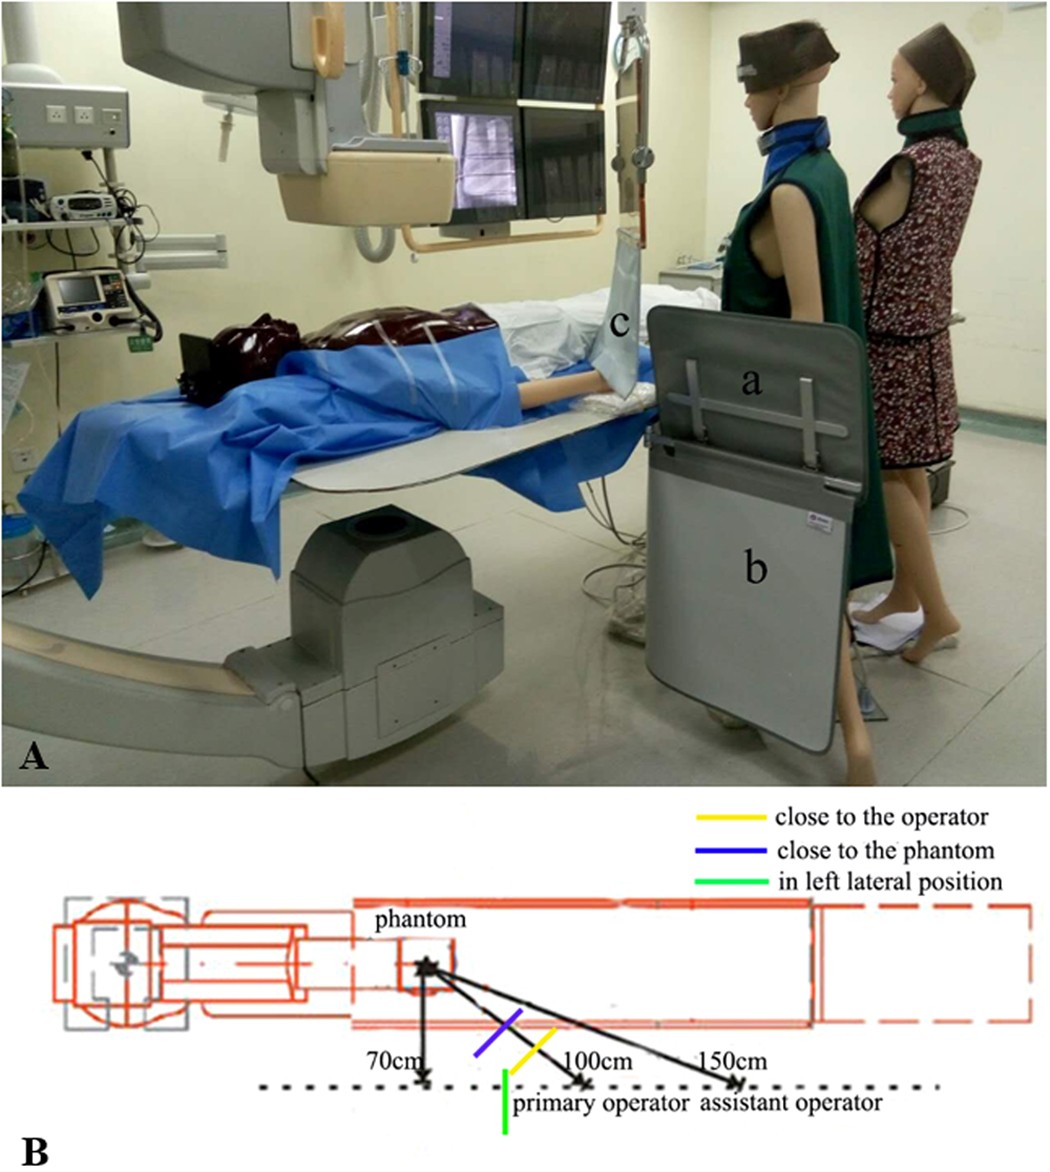 Operator Radiation and the Efficacy of Ceiling-Suspended Lead Screen  Shielding during Coronary Angiography: An Anthropomorphic Phantom Study  Using Real-Time Dosimeters | Scientific Reports